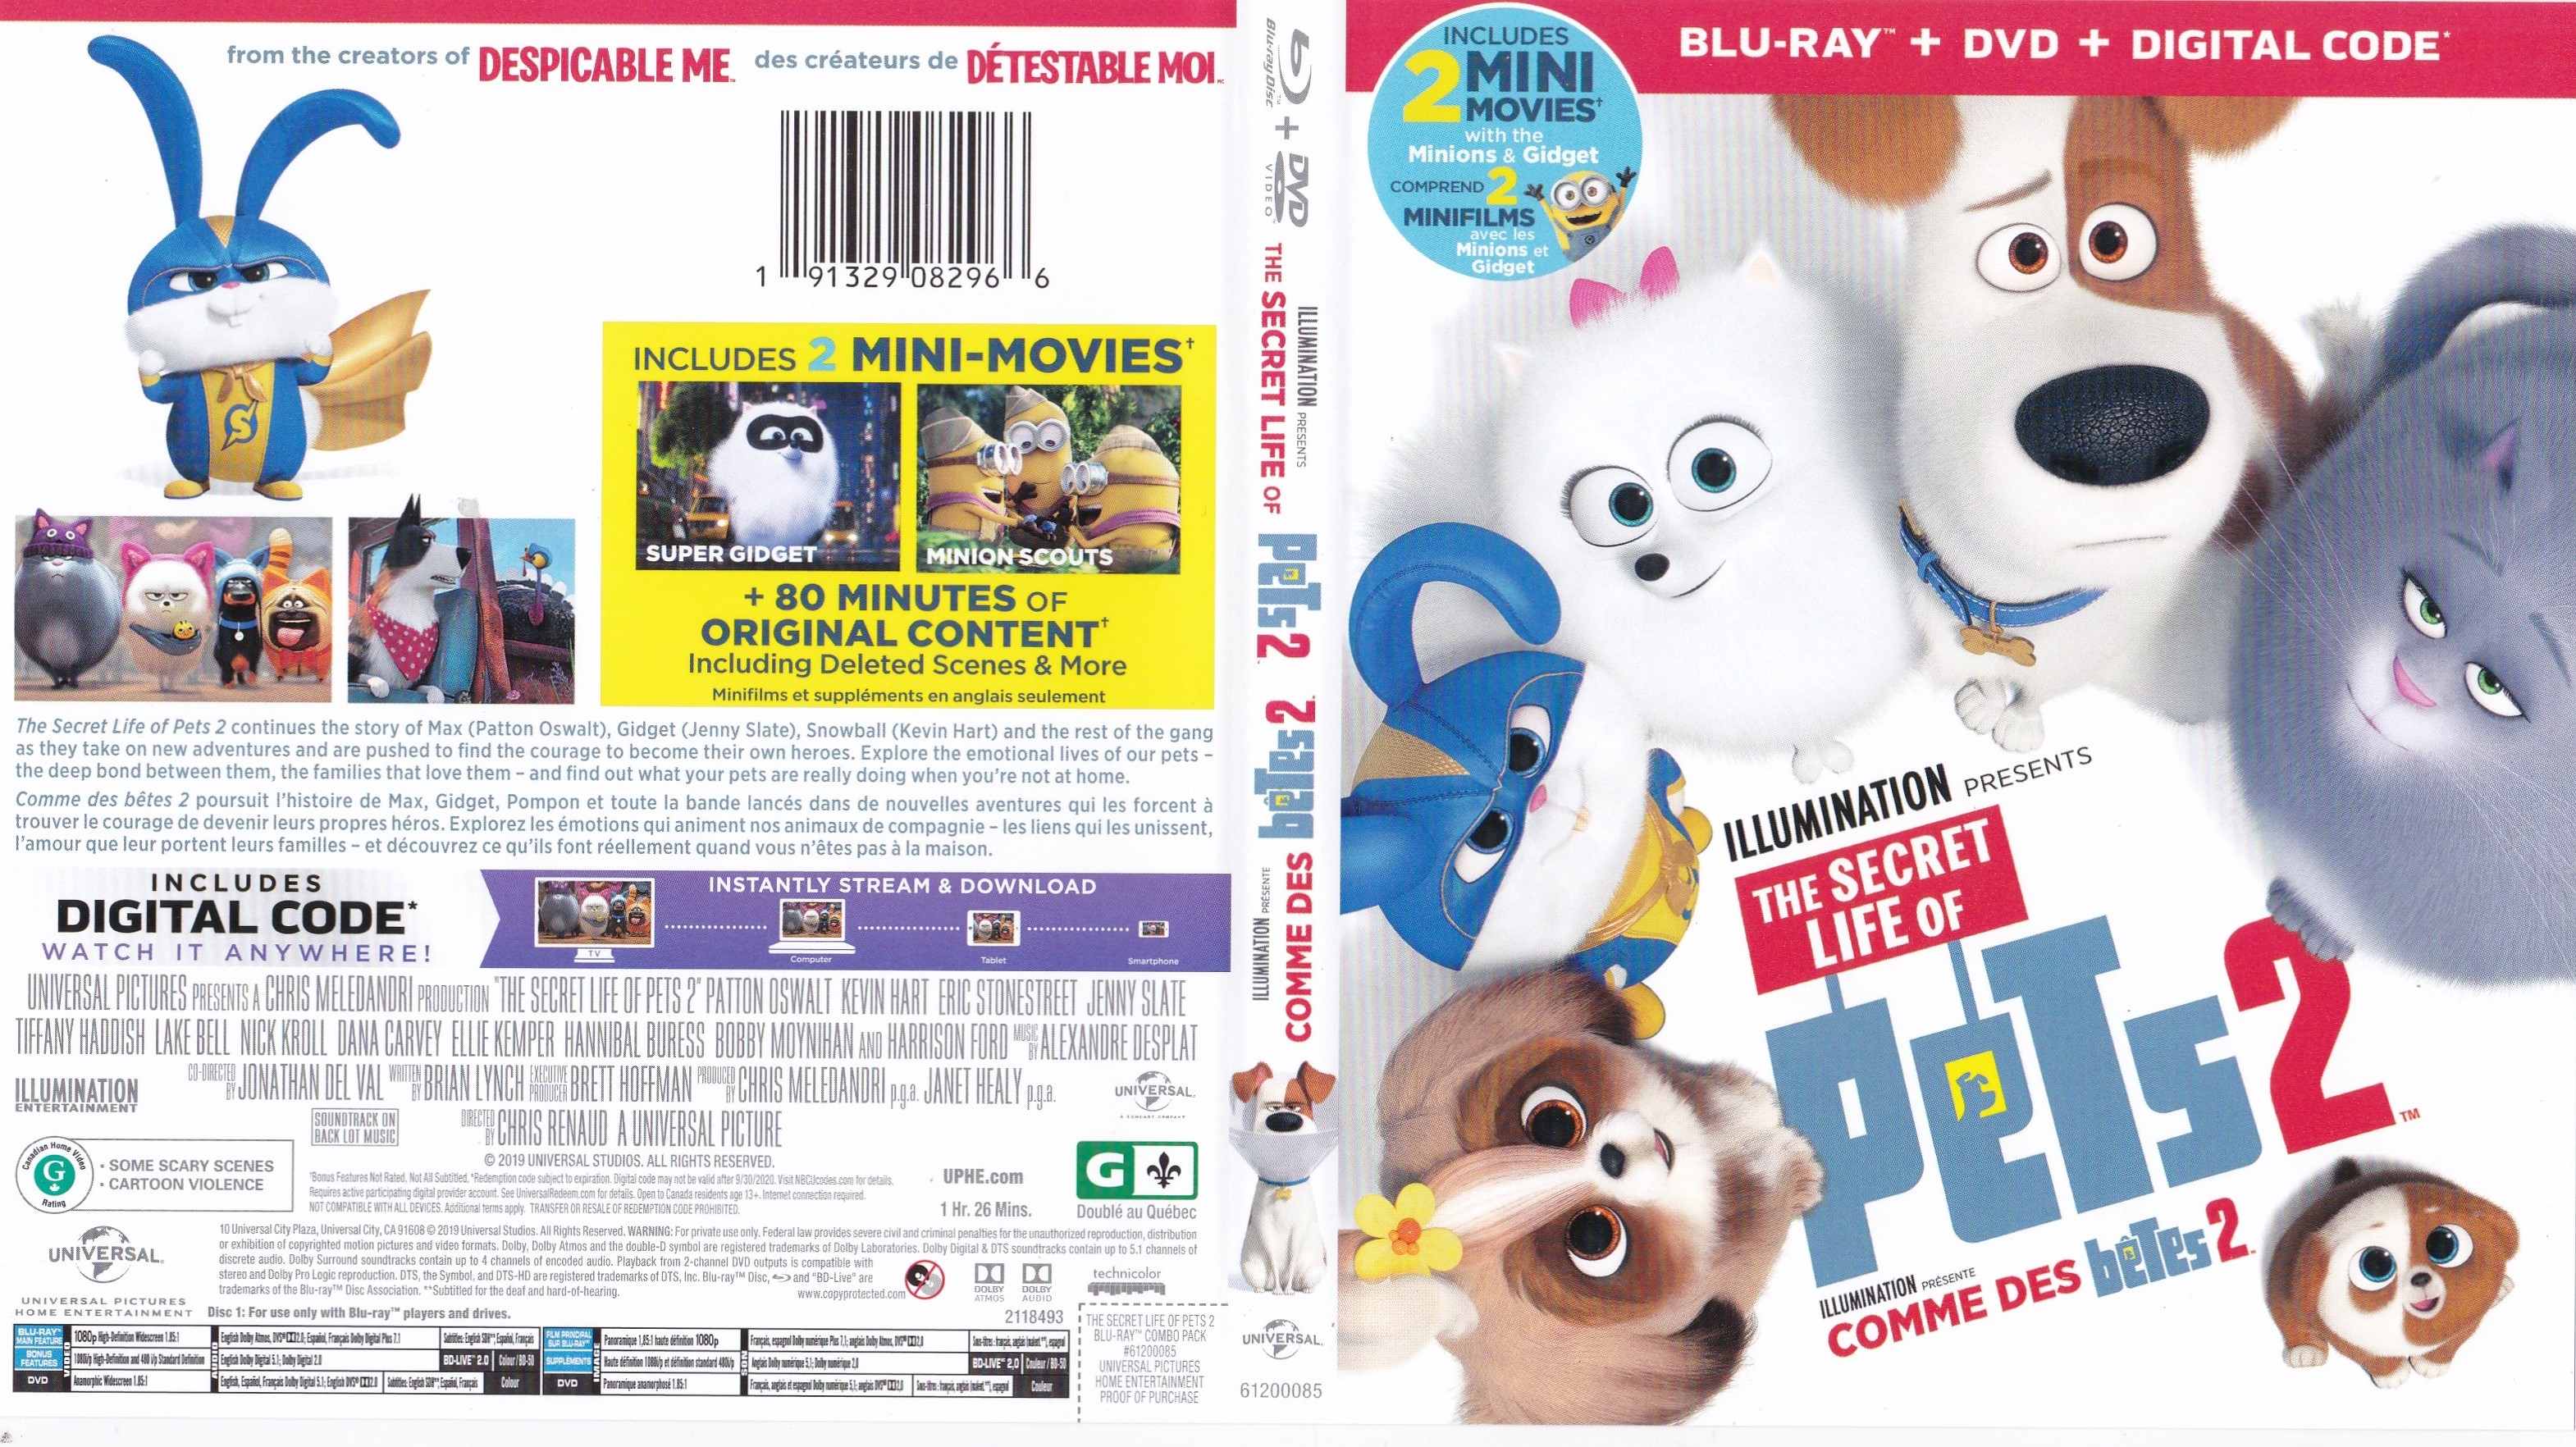 Jaquette DVD Comme des betes 2 - The secret life of pets 2 (canadienne) (BLU-RAY)